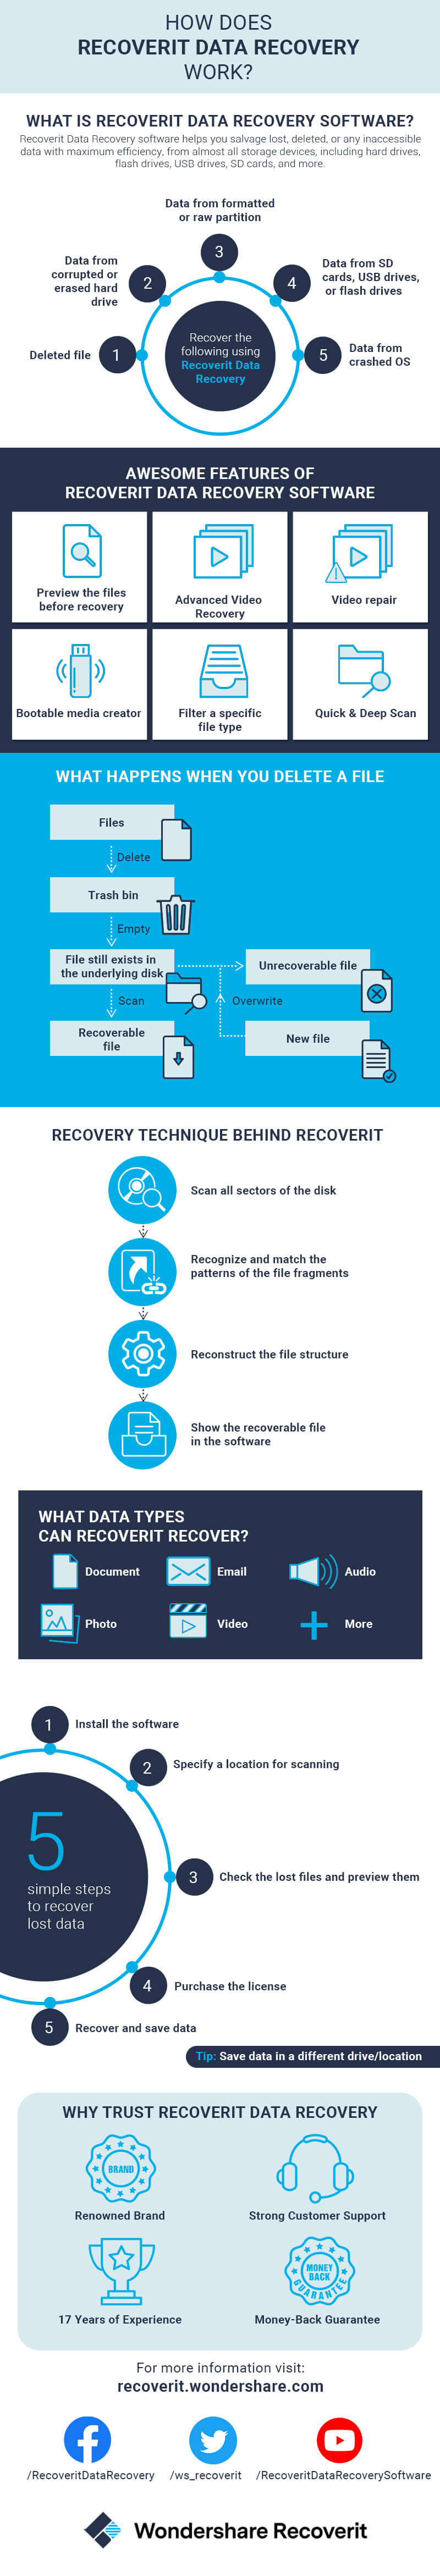 wondershare recoverit recovery limit